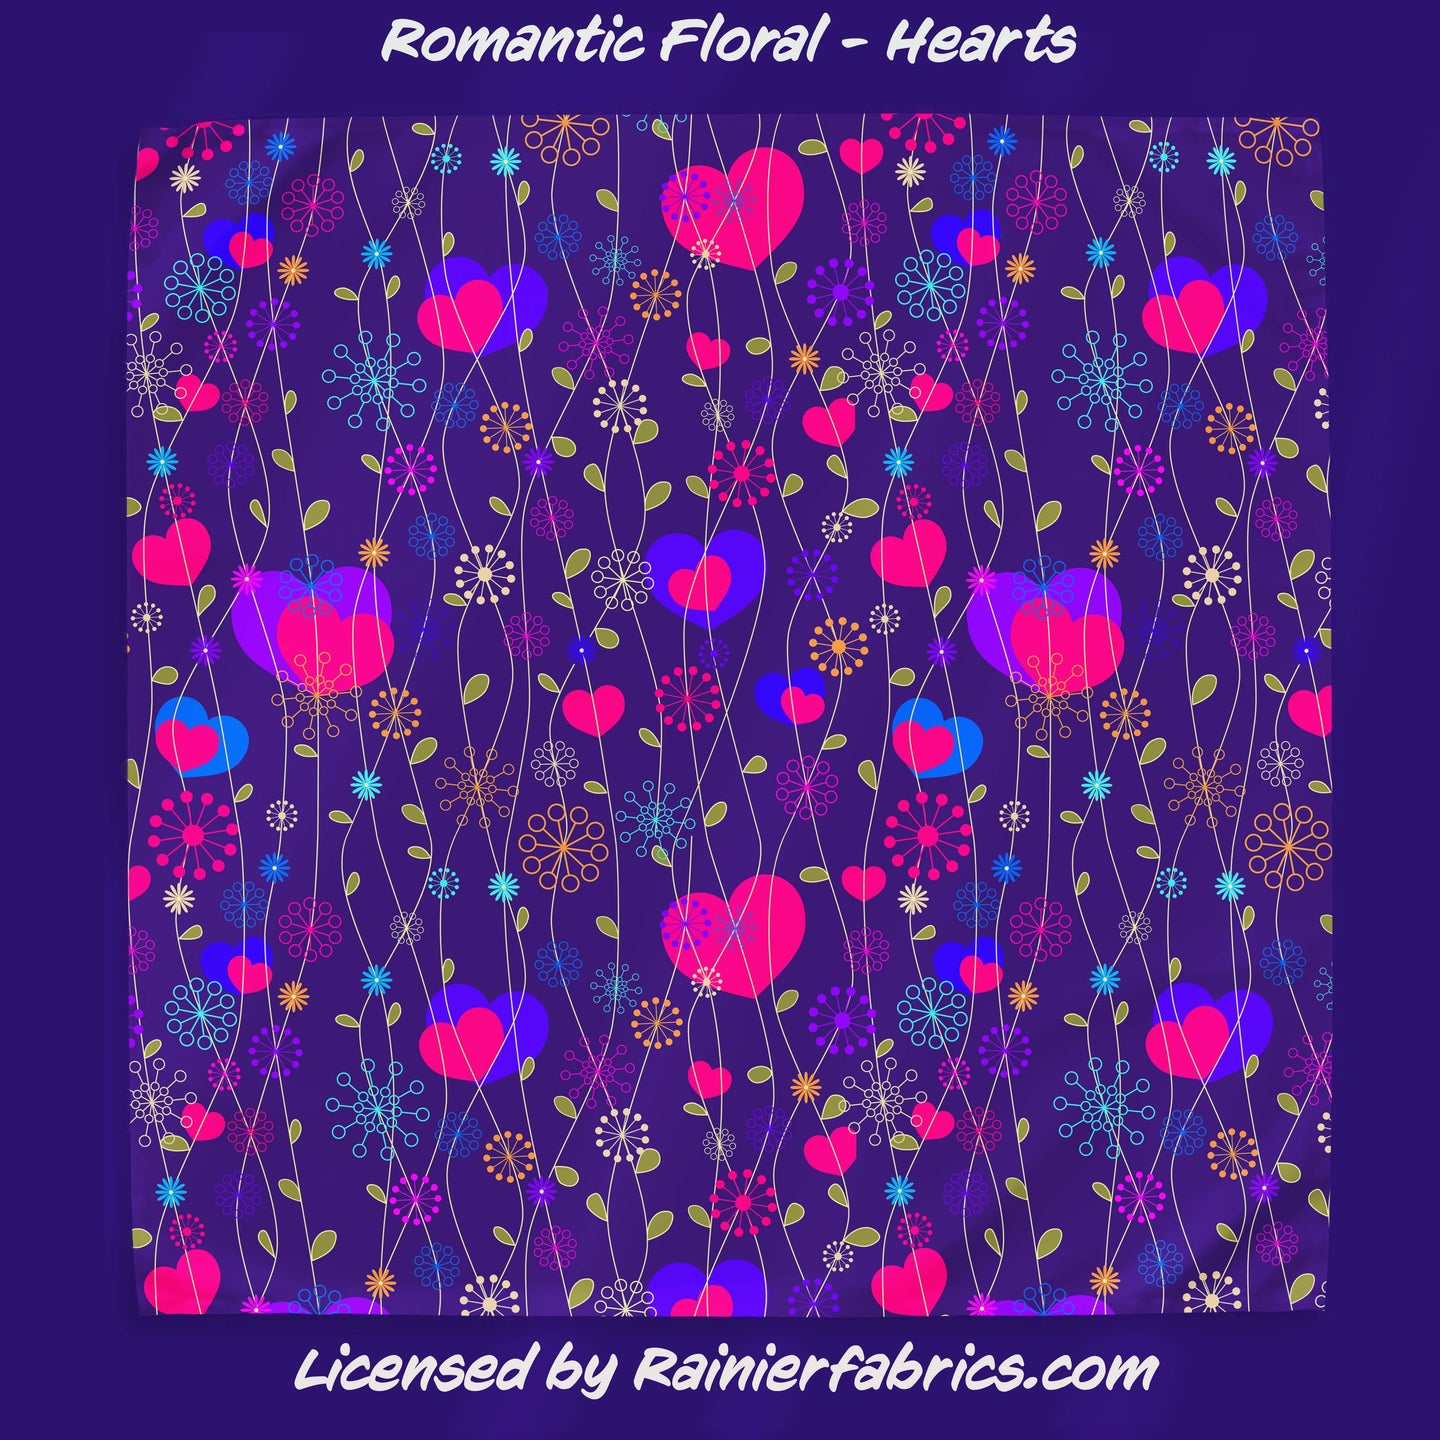 Romantic Floral - Purples, Pinks and Hearts - 2-5 day TAT - Order by 1/2 yard; Blankets and towels available too